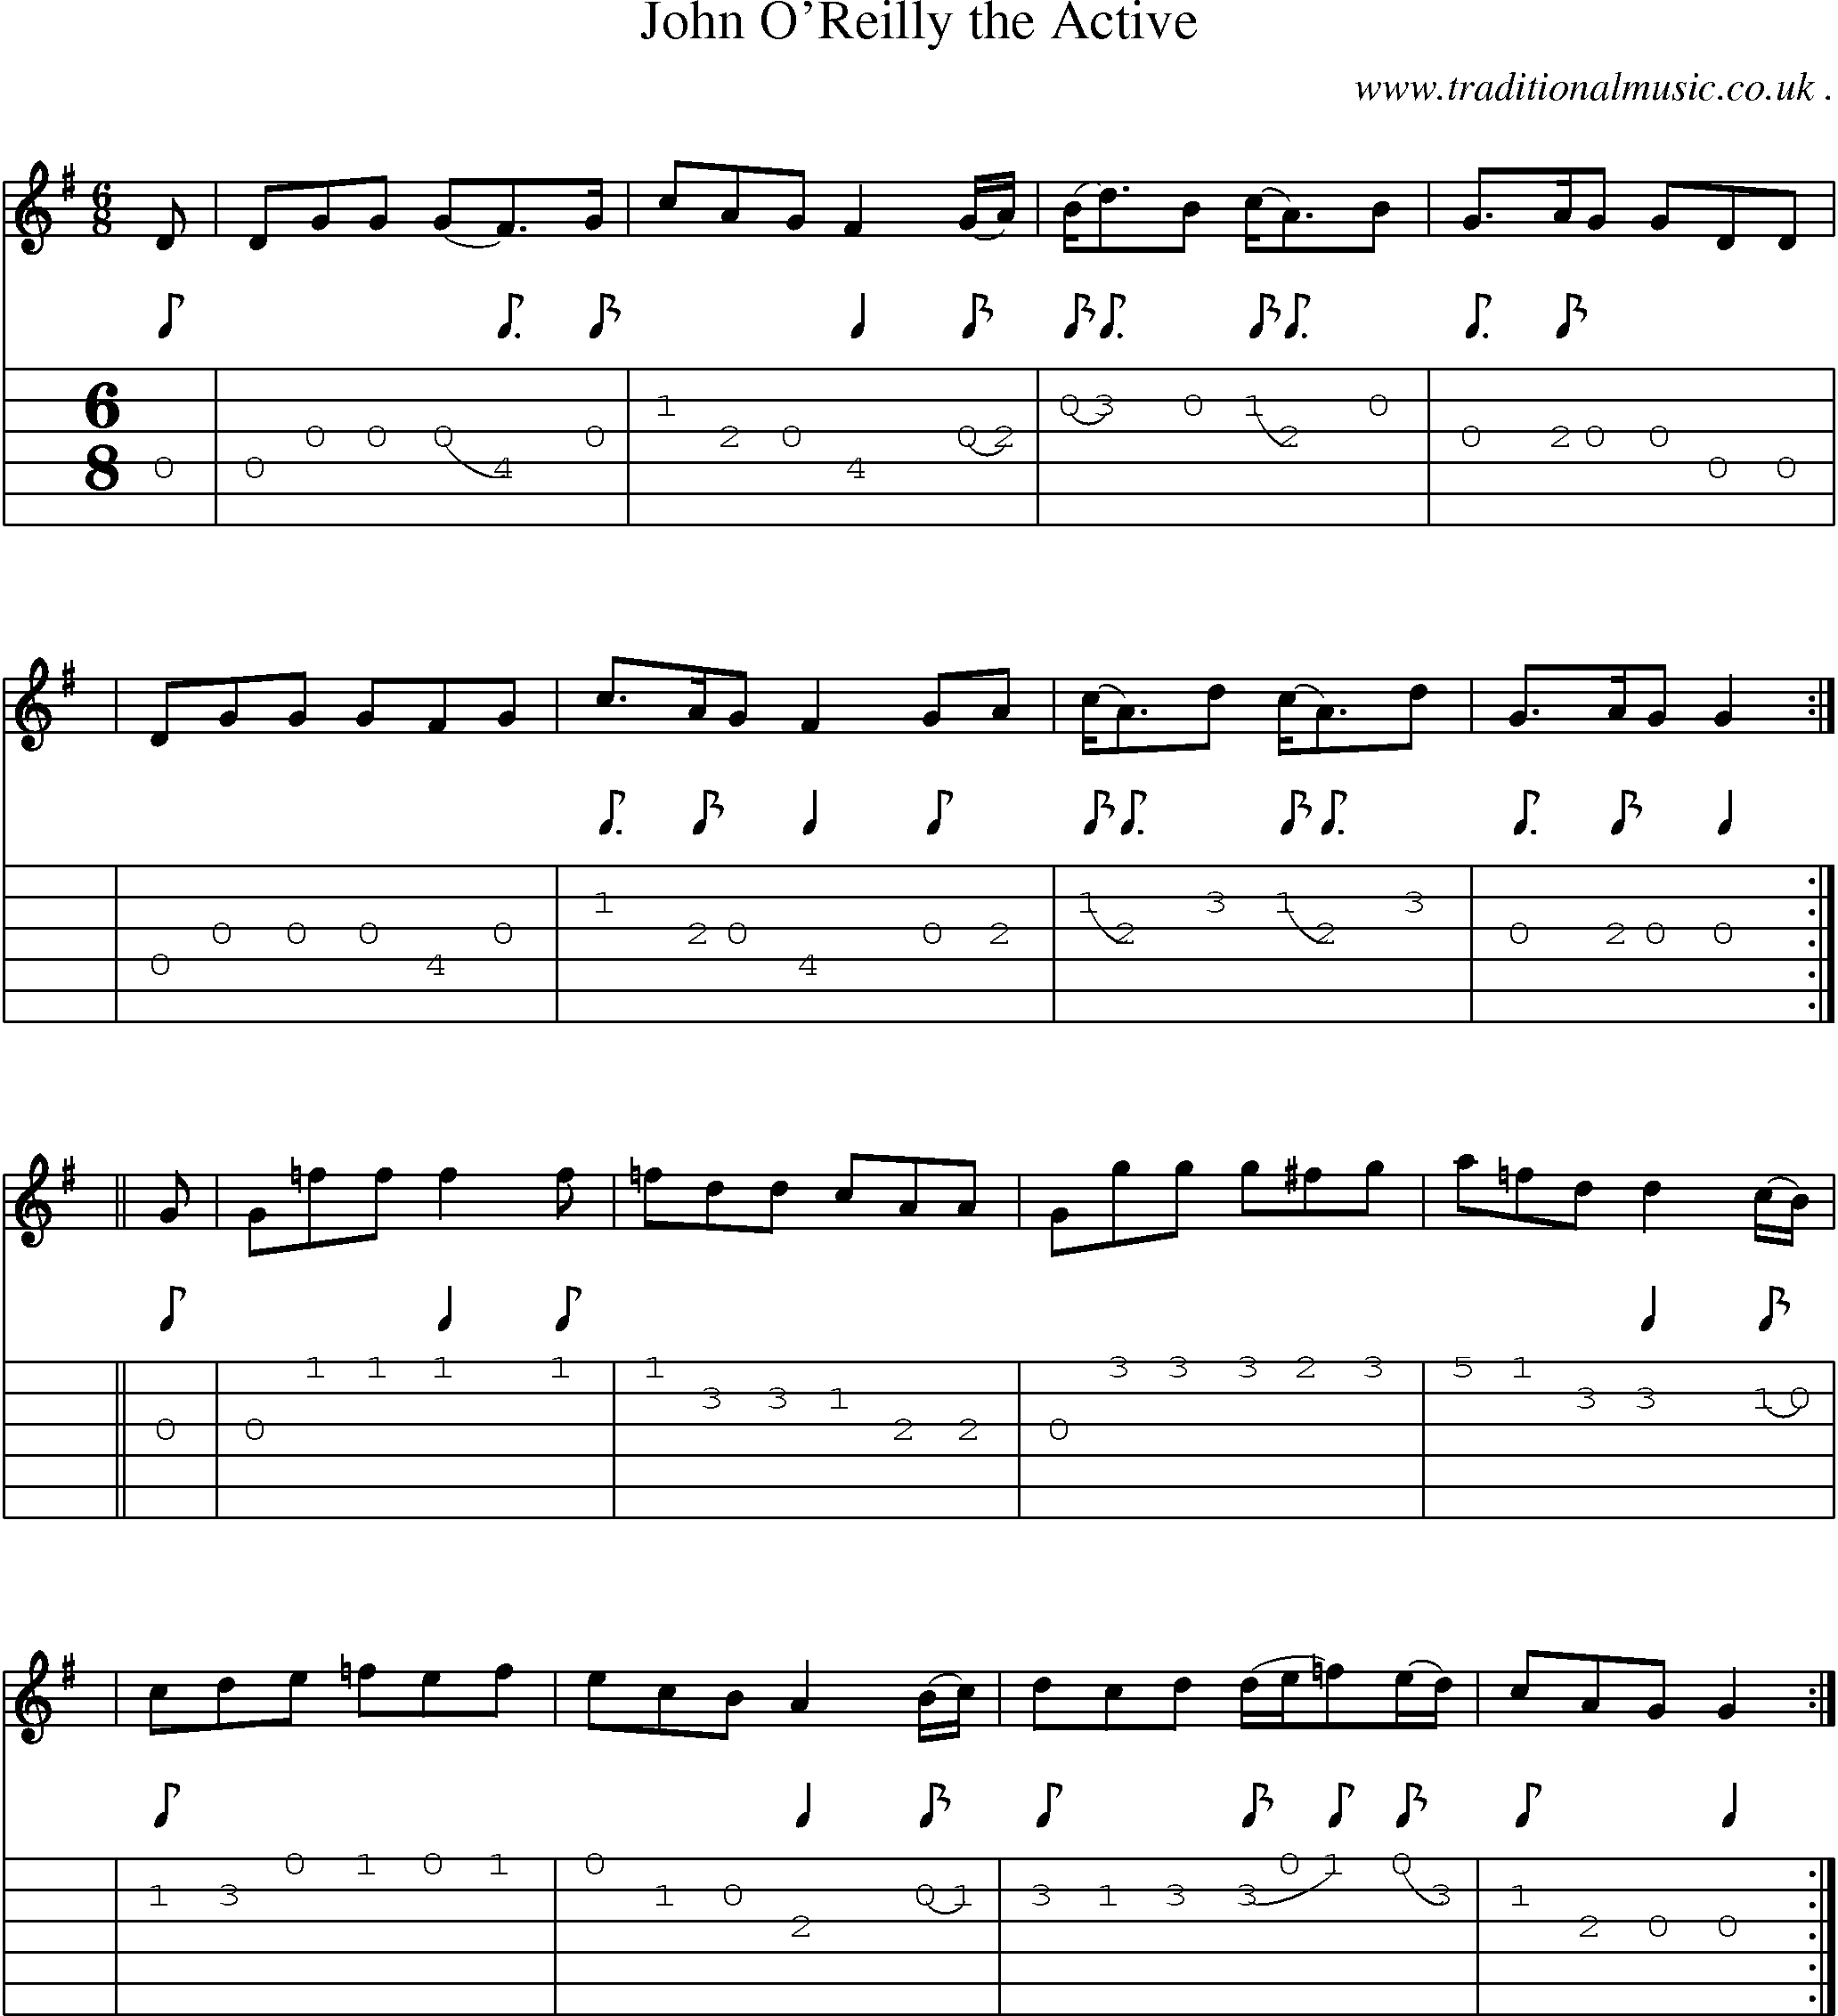 Sheet-music  score, Chords and Guitar Tabs for John Oreilly The Active